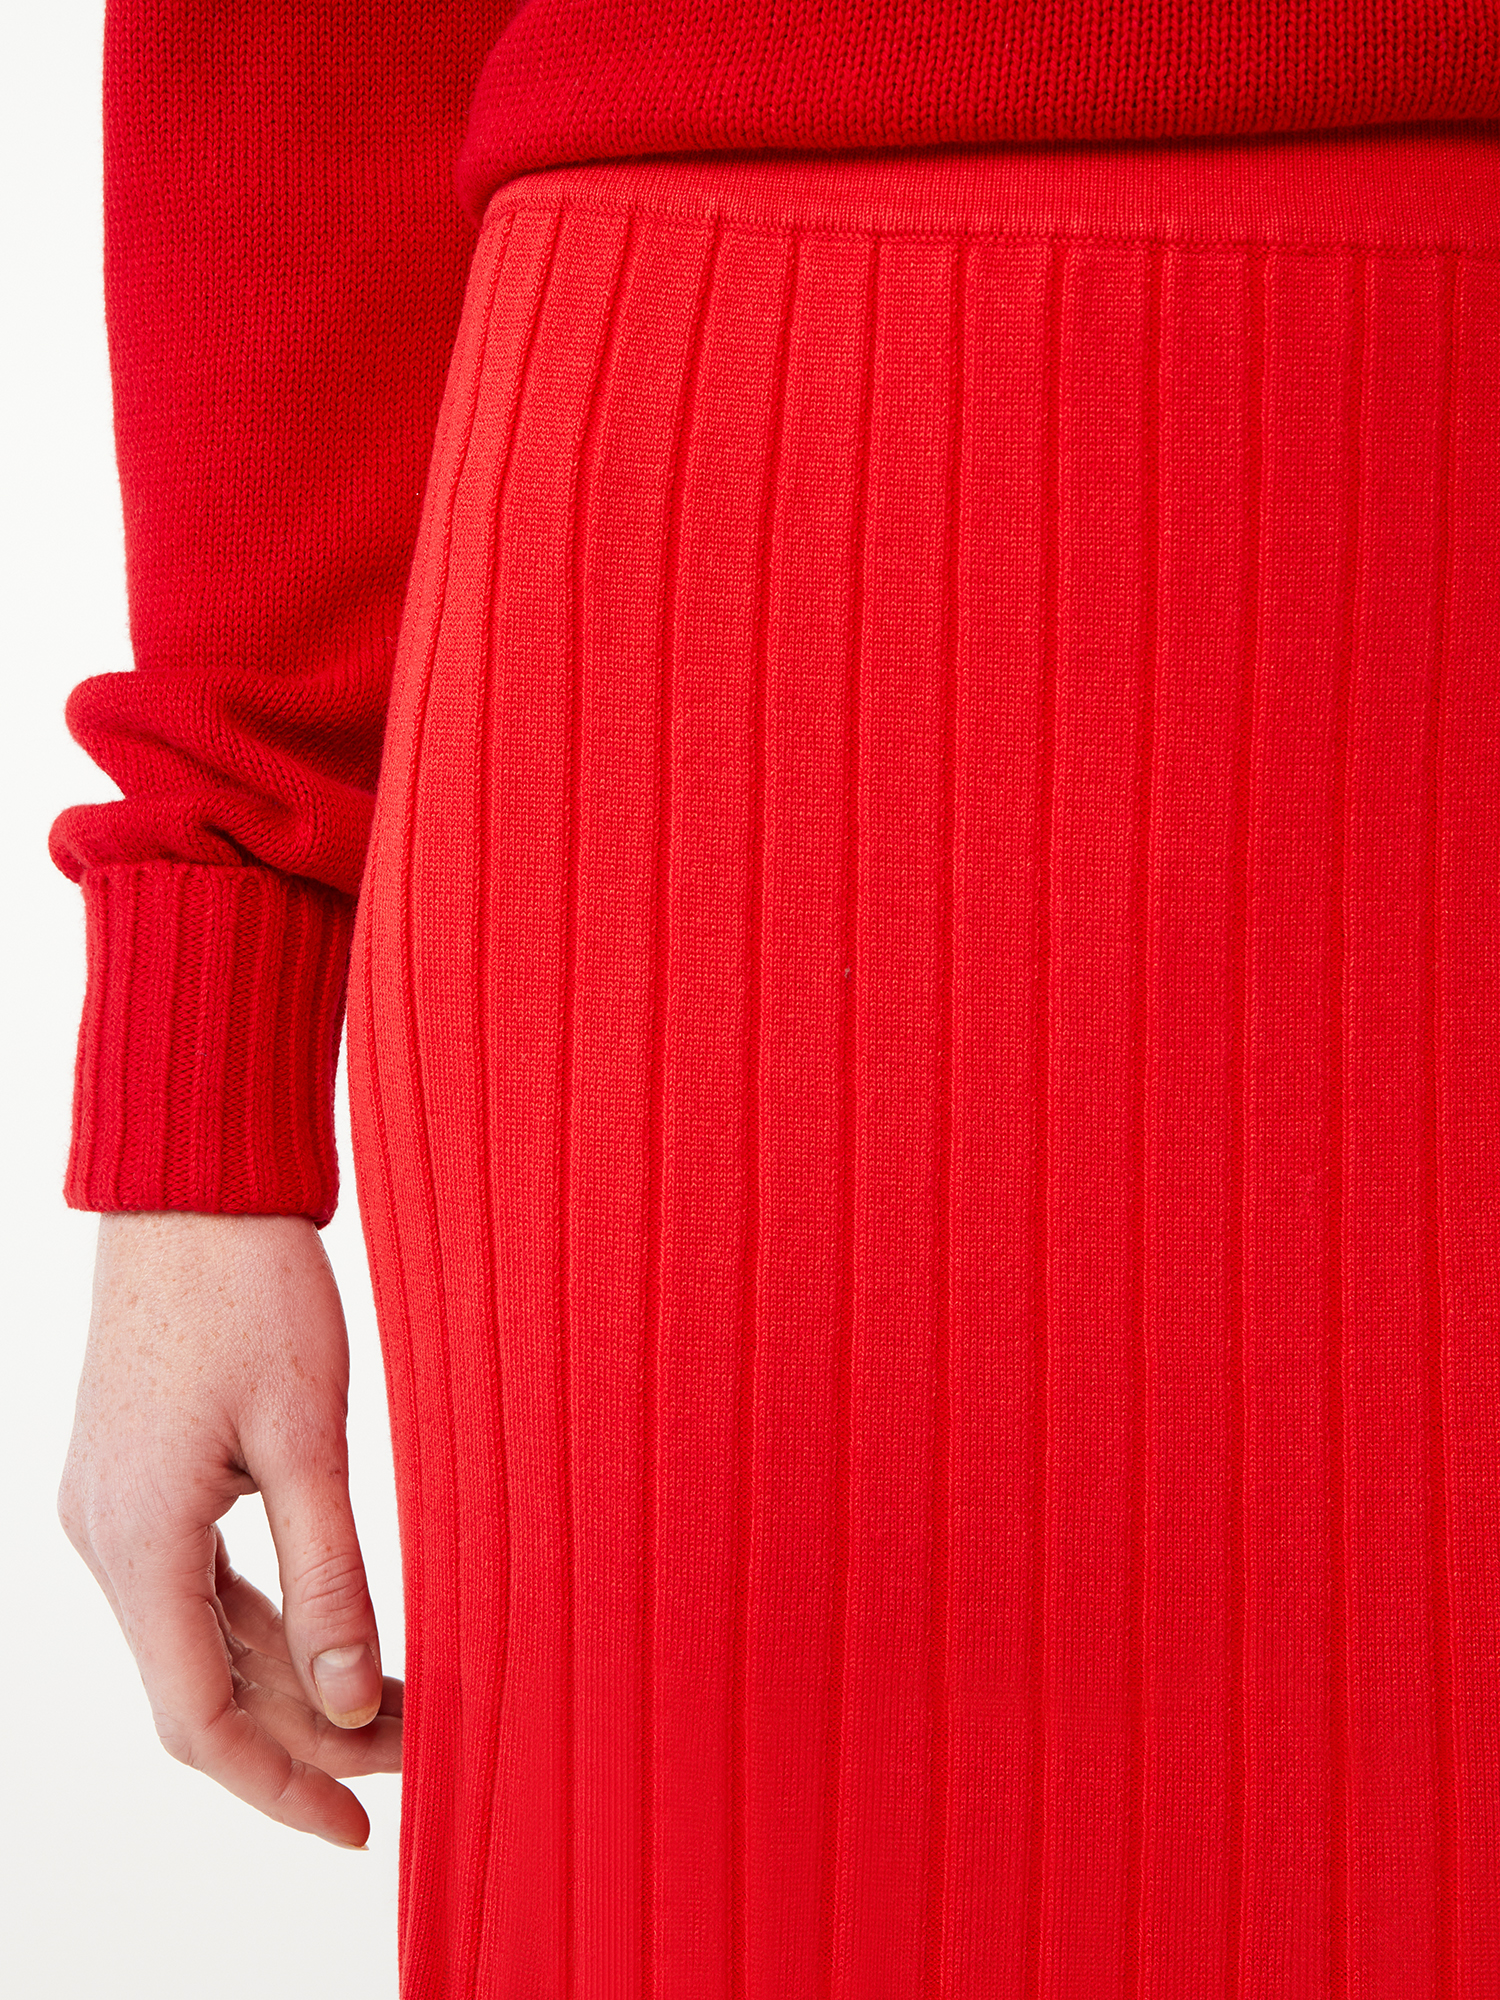 Free Assembly Women's Pleated Midi Sweater Skirt - image 4 of 6